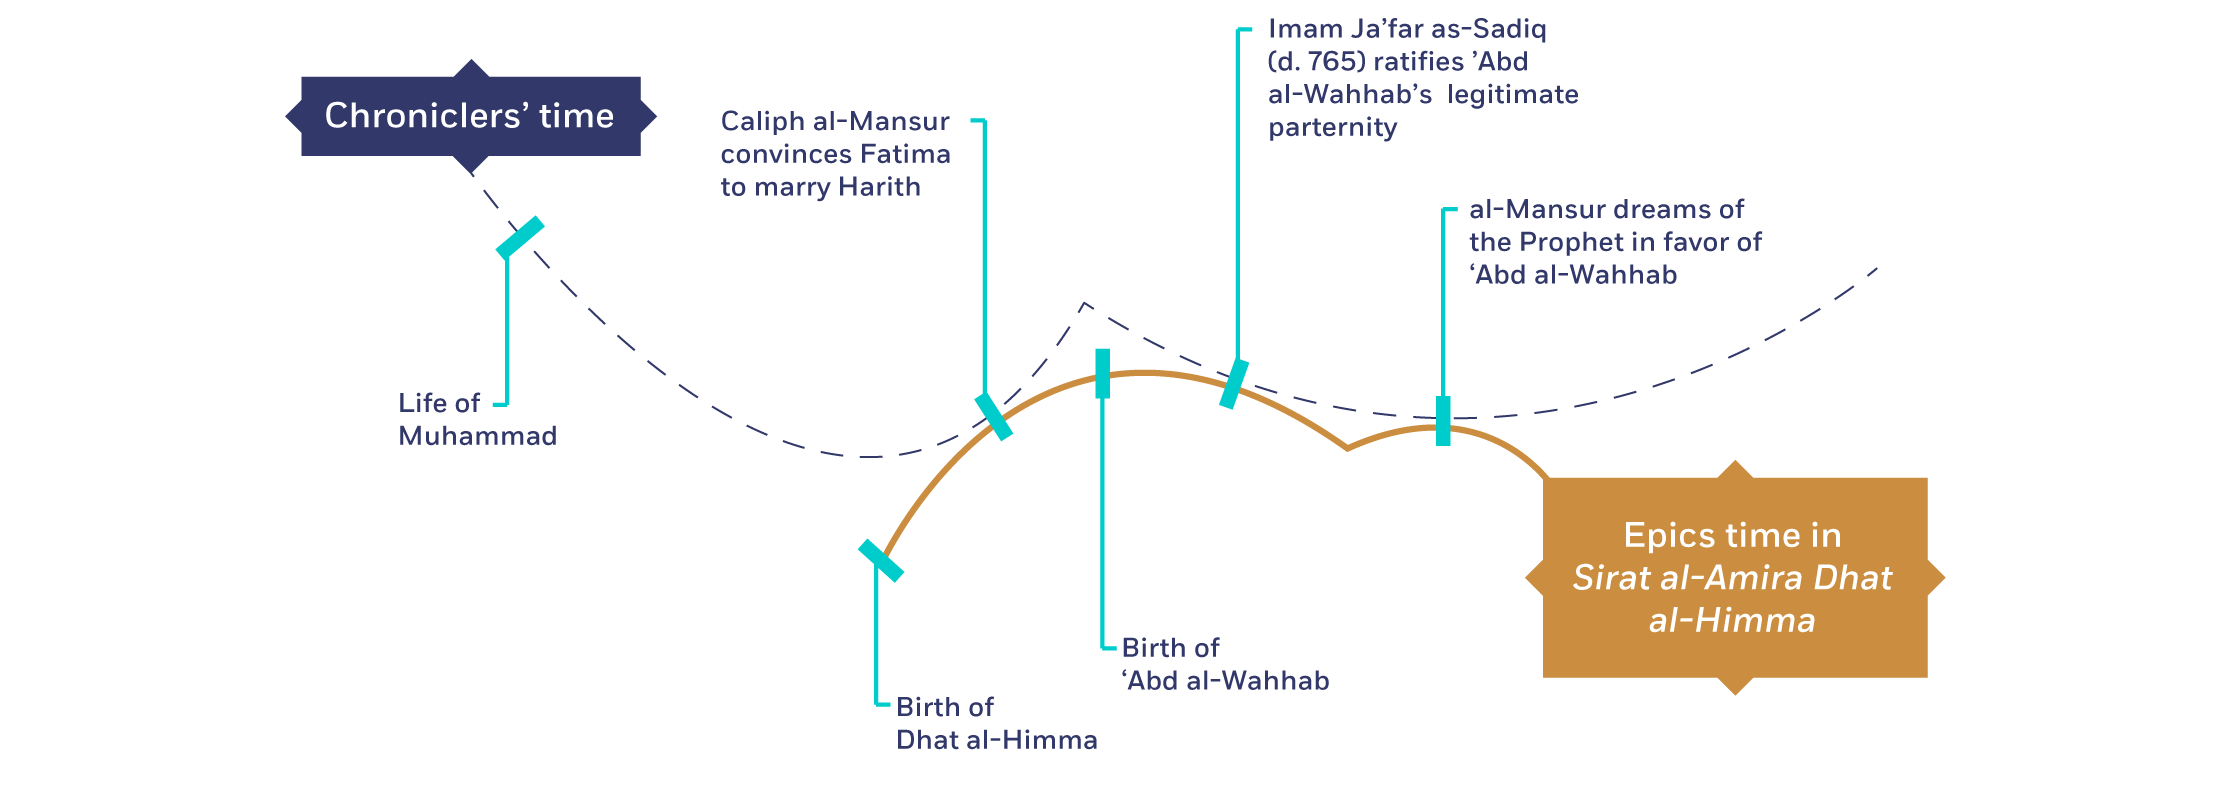 Infographic appearing on the website showing different timelines intersecting